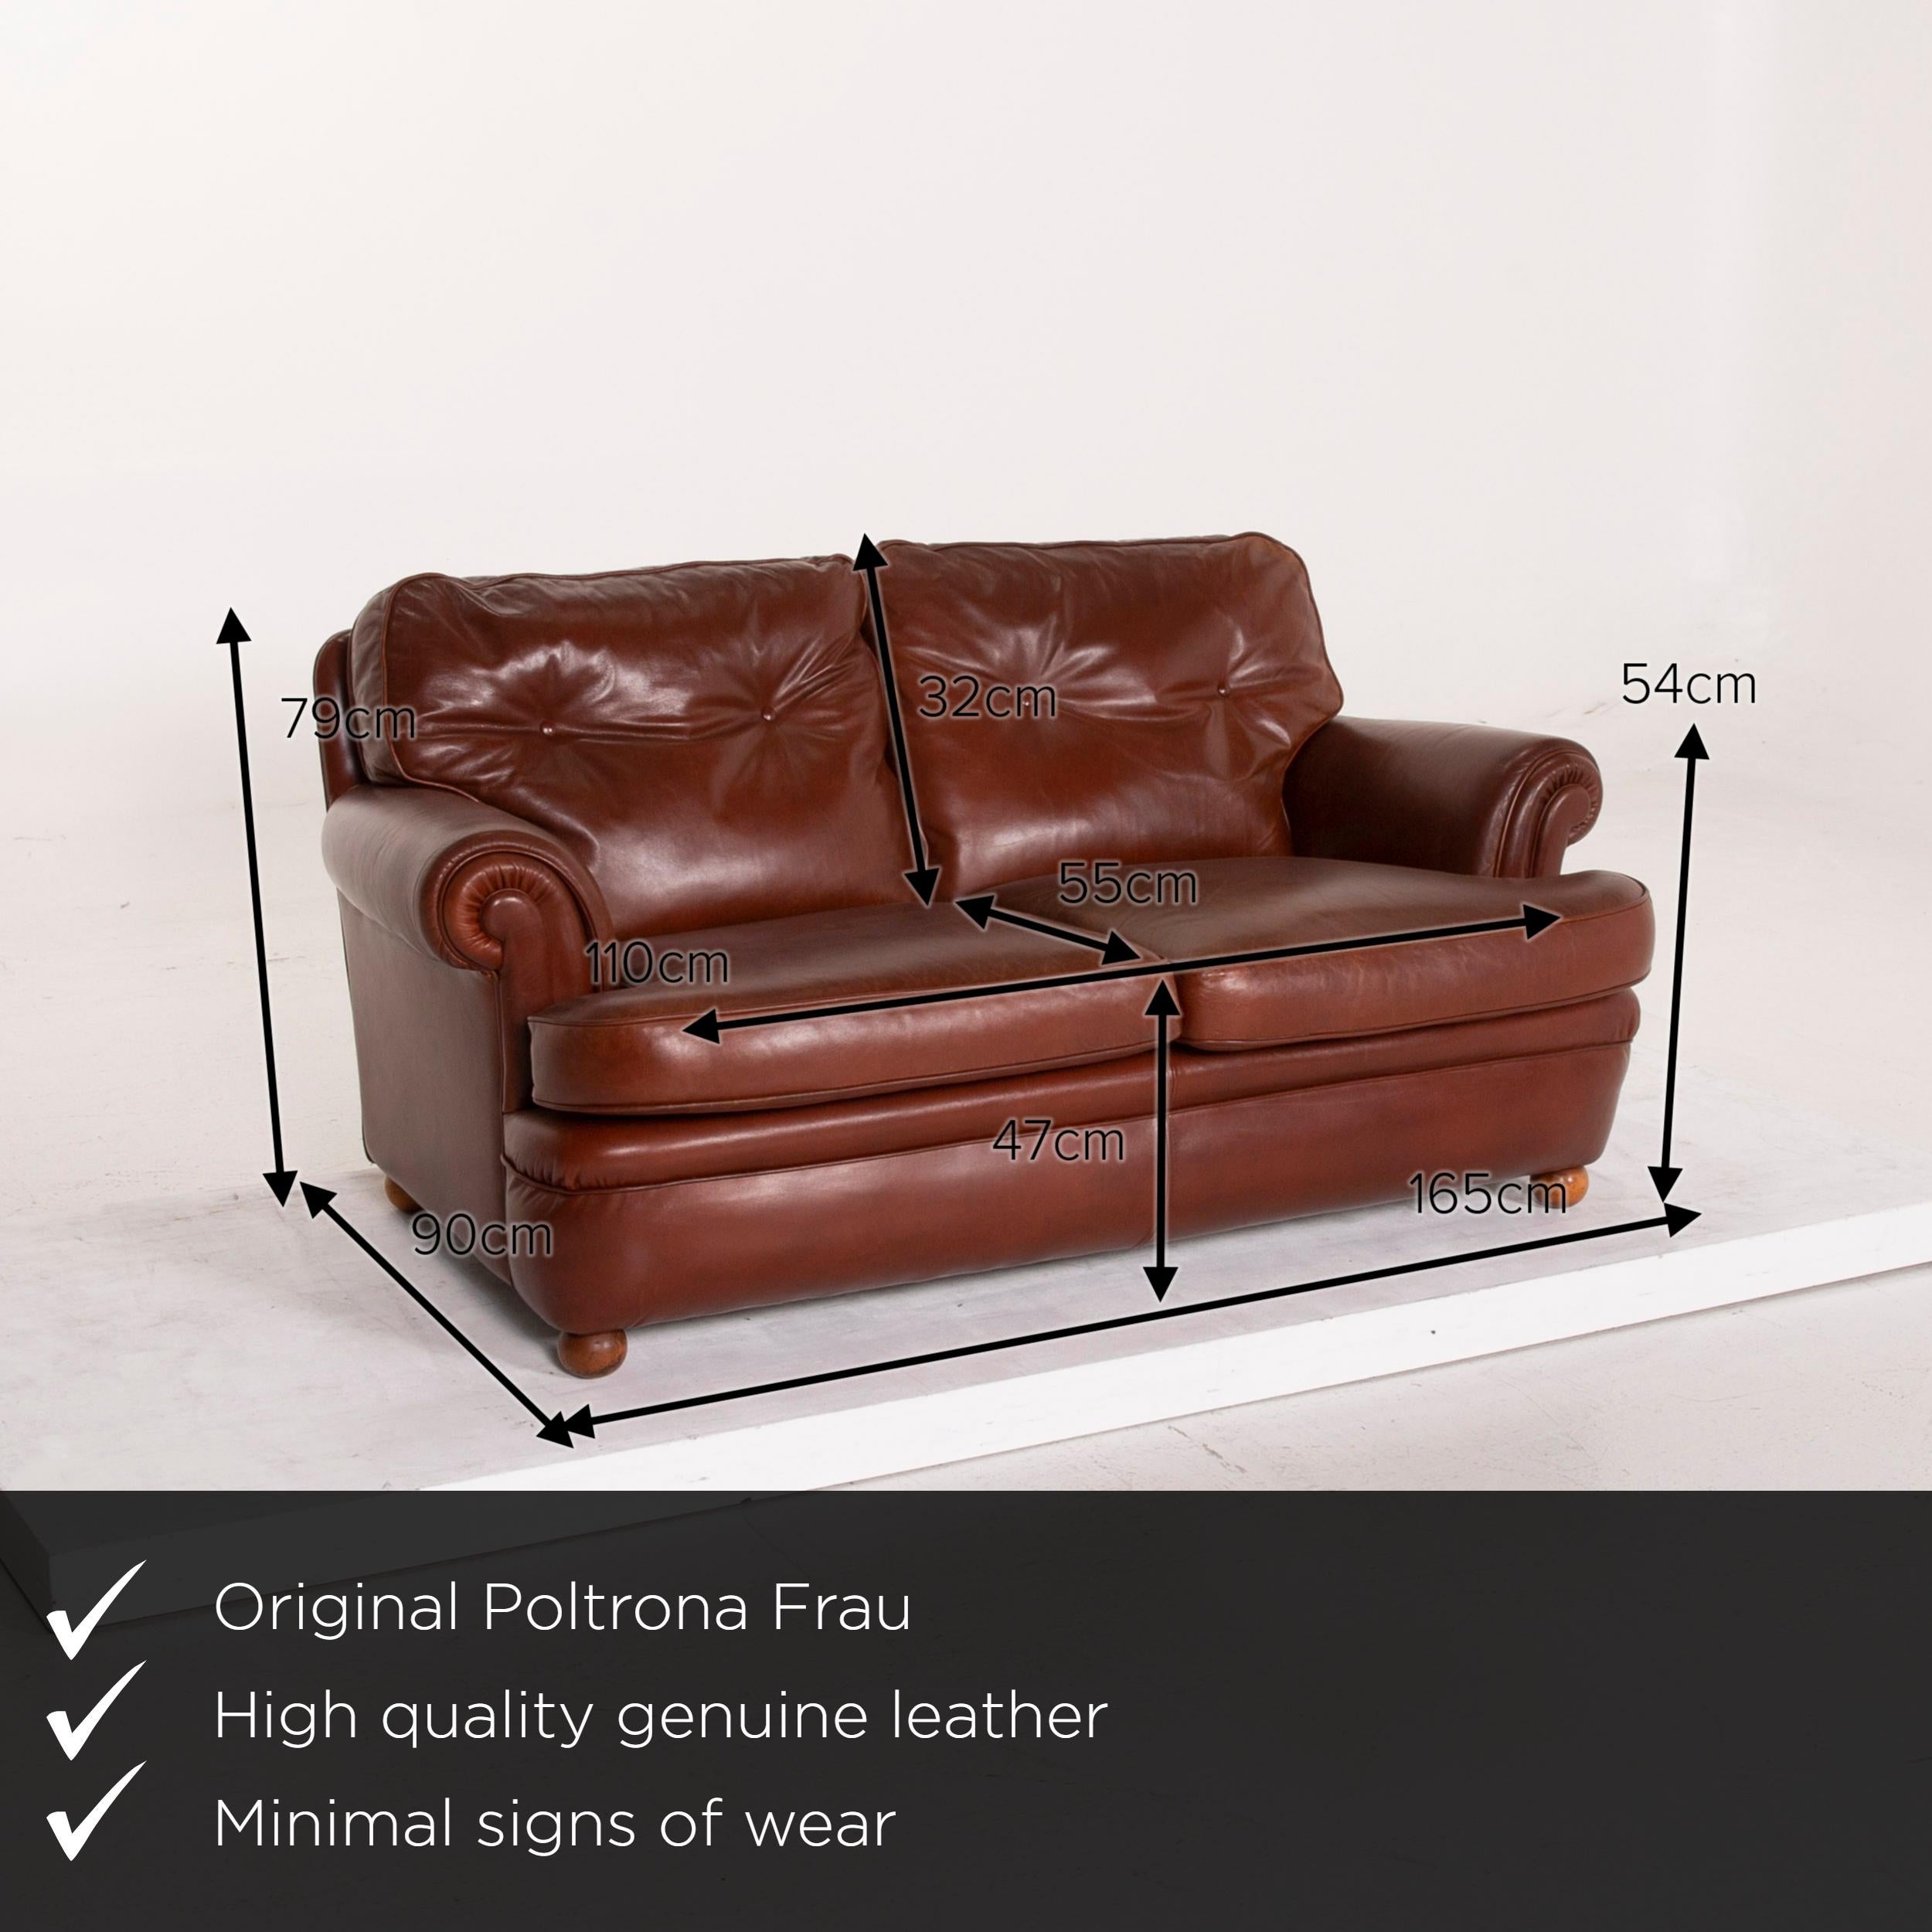 We present to you a Poltrona Frau leather sofa set cognac two-seat stool.
   
Product measurements in centimeters:
 
Depth 90
Width 175
Height 79
Seat height 47
Rest height 54
Seat depth 55
Seat width 110
Back height 32.
 
 
  